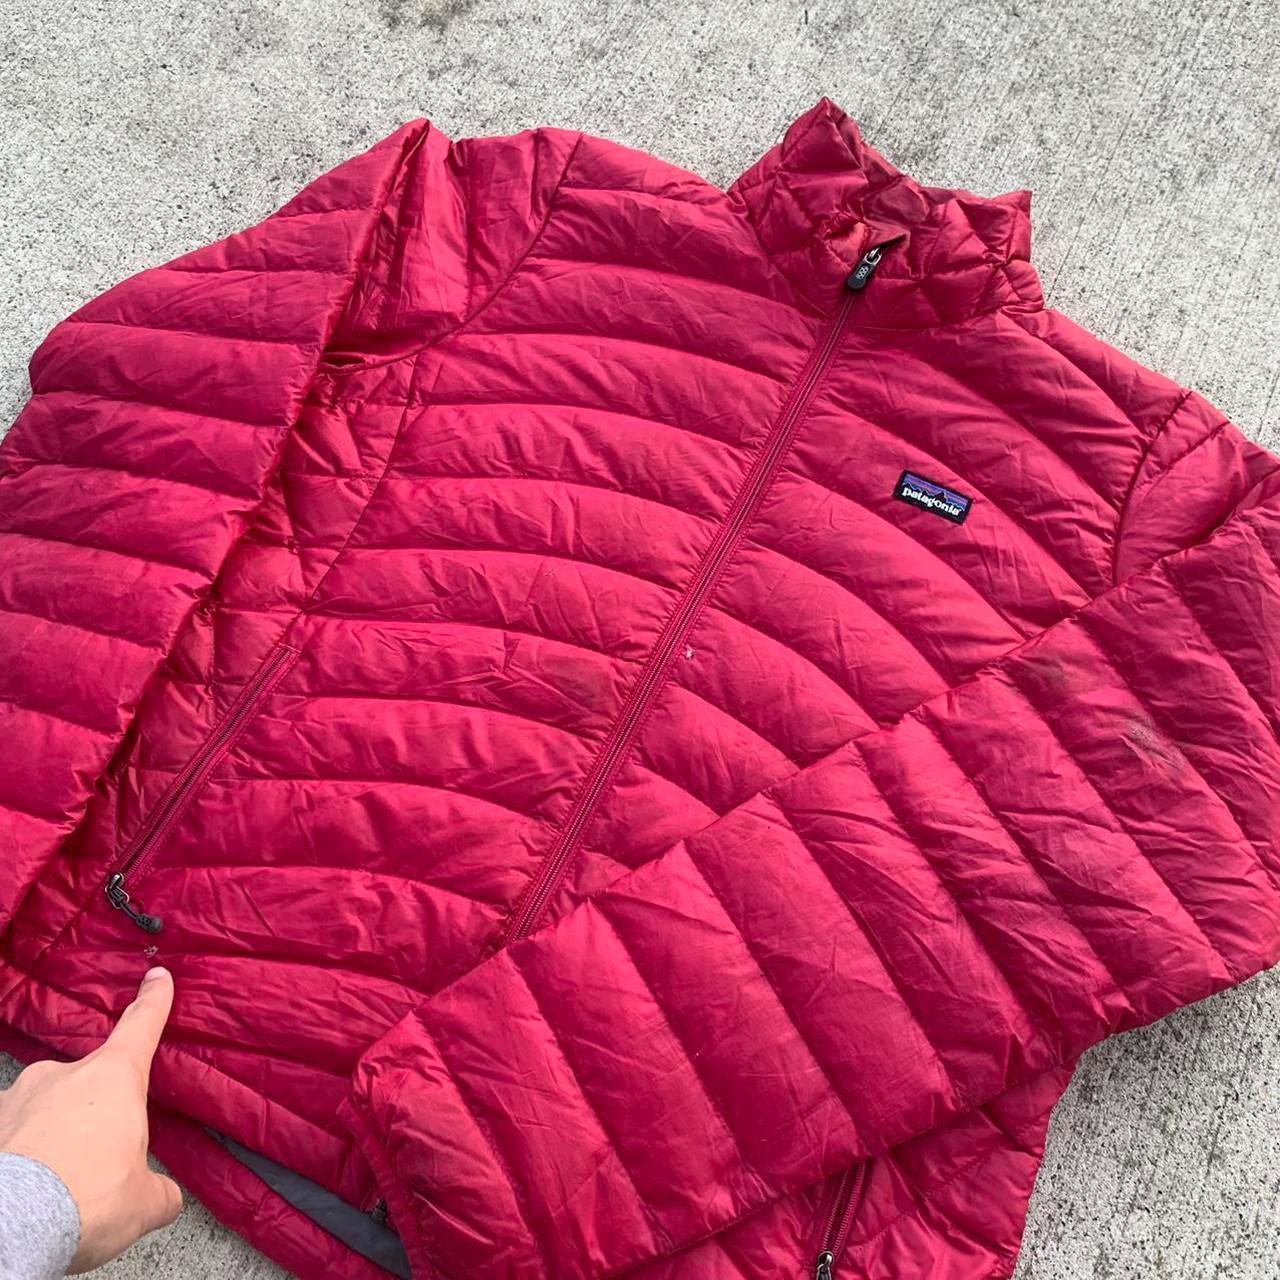 Product Image 2 - Patagonia Puffer Jacket
Condition: used, needs